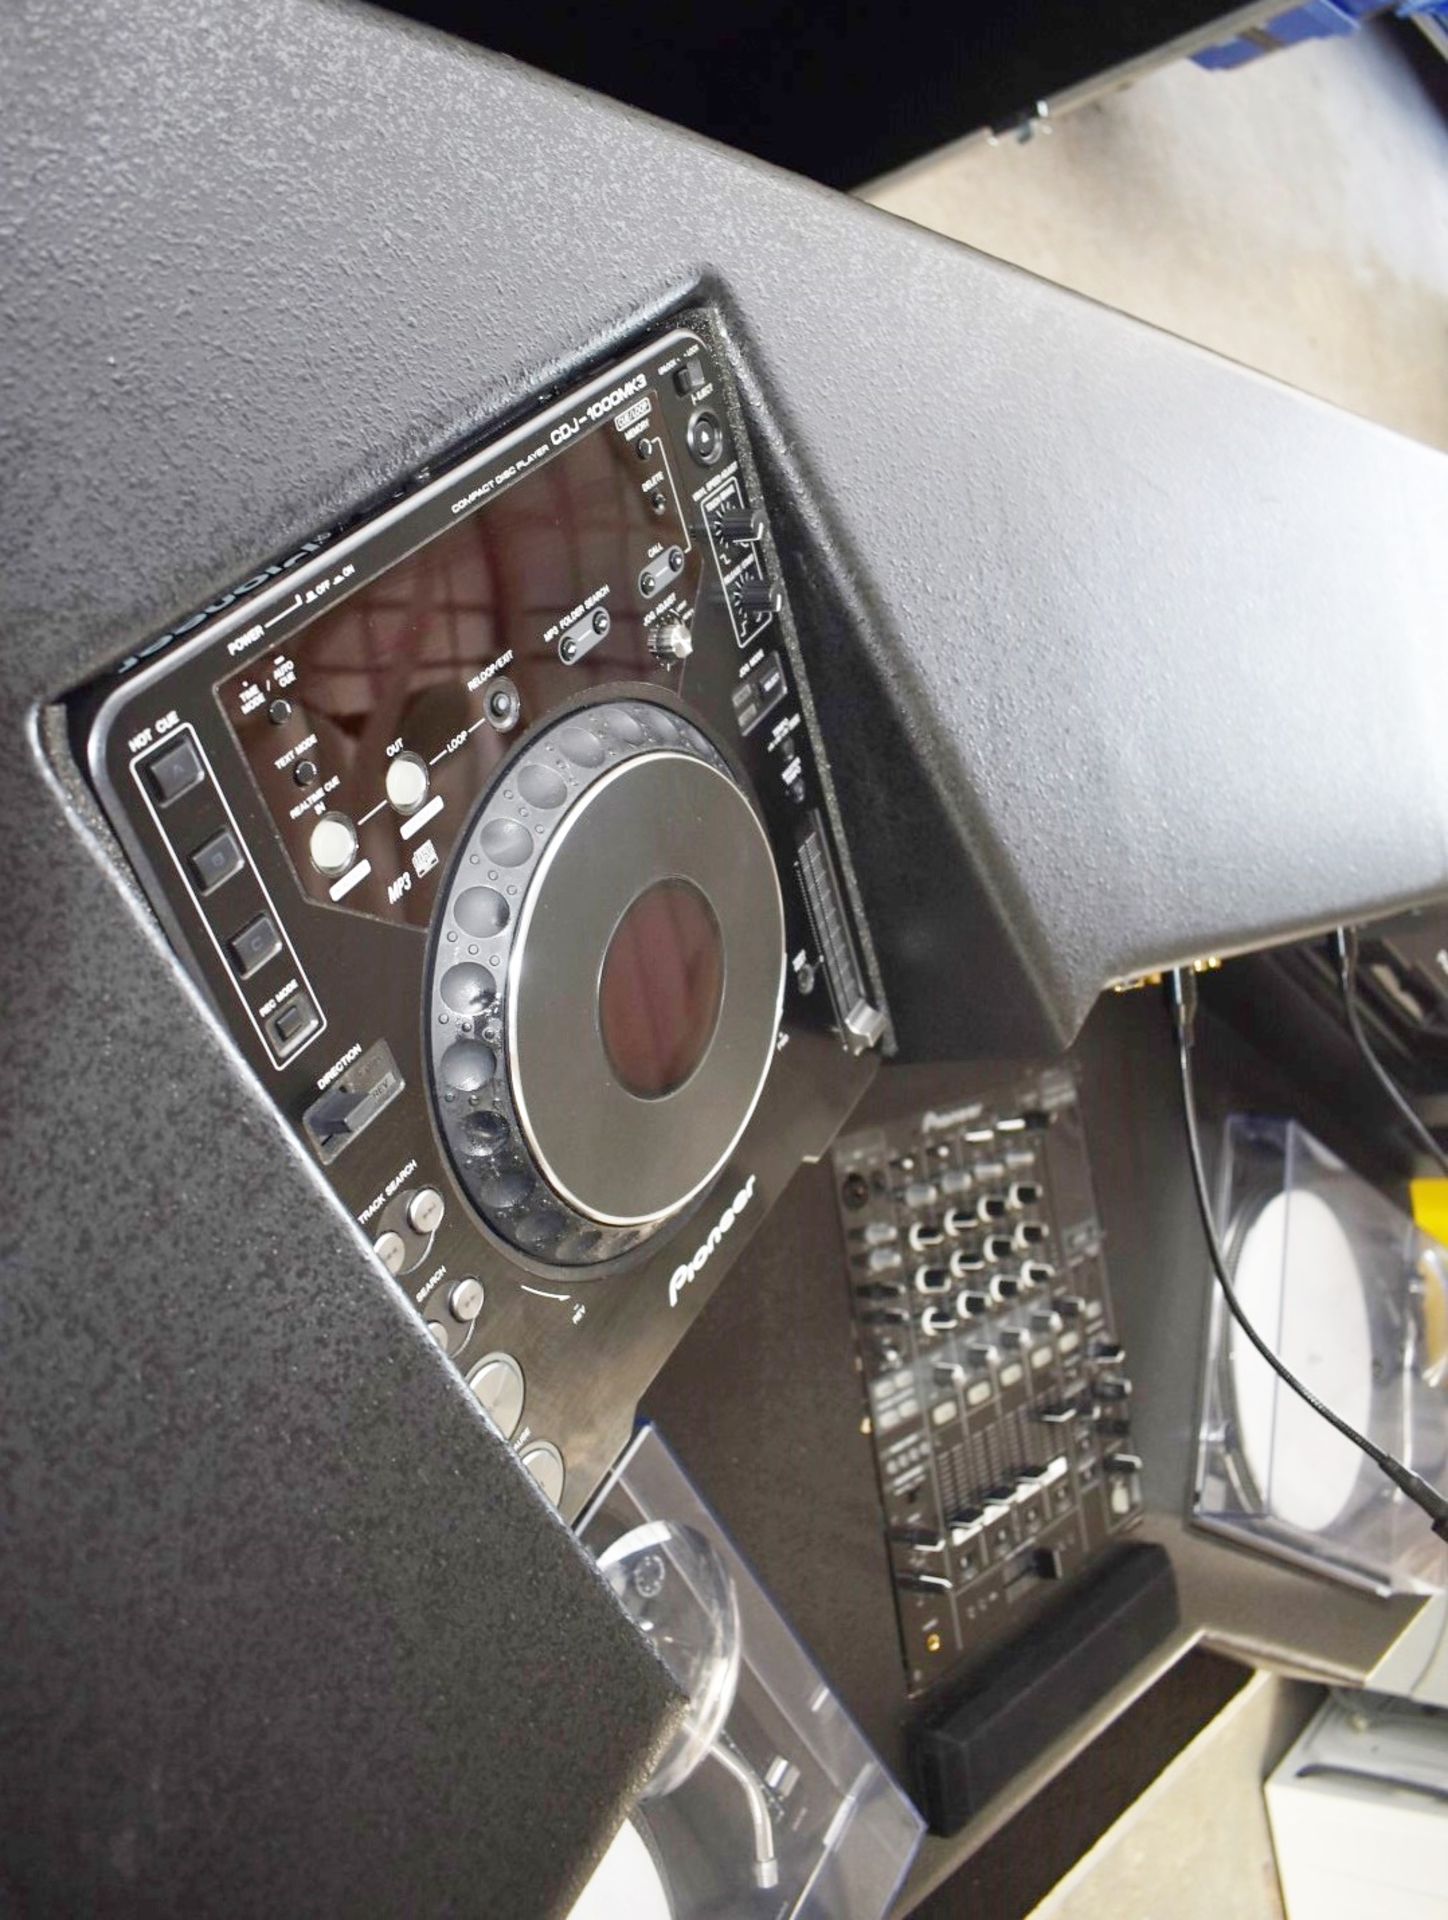 1 x Mobile DJ Booth in Shock Solutions Flight Case - Features Equipment By Pioneer, Technics & Bose! - Image 42 of 95